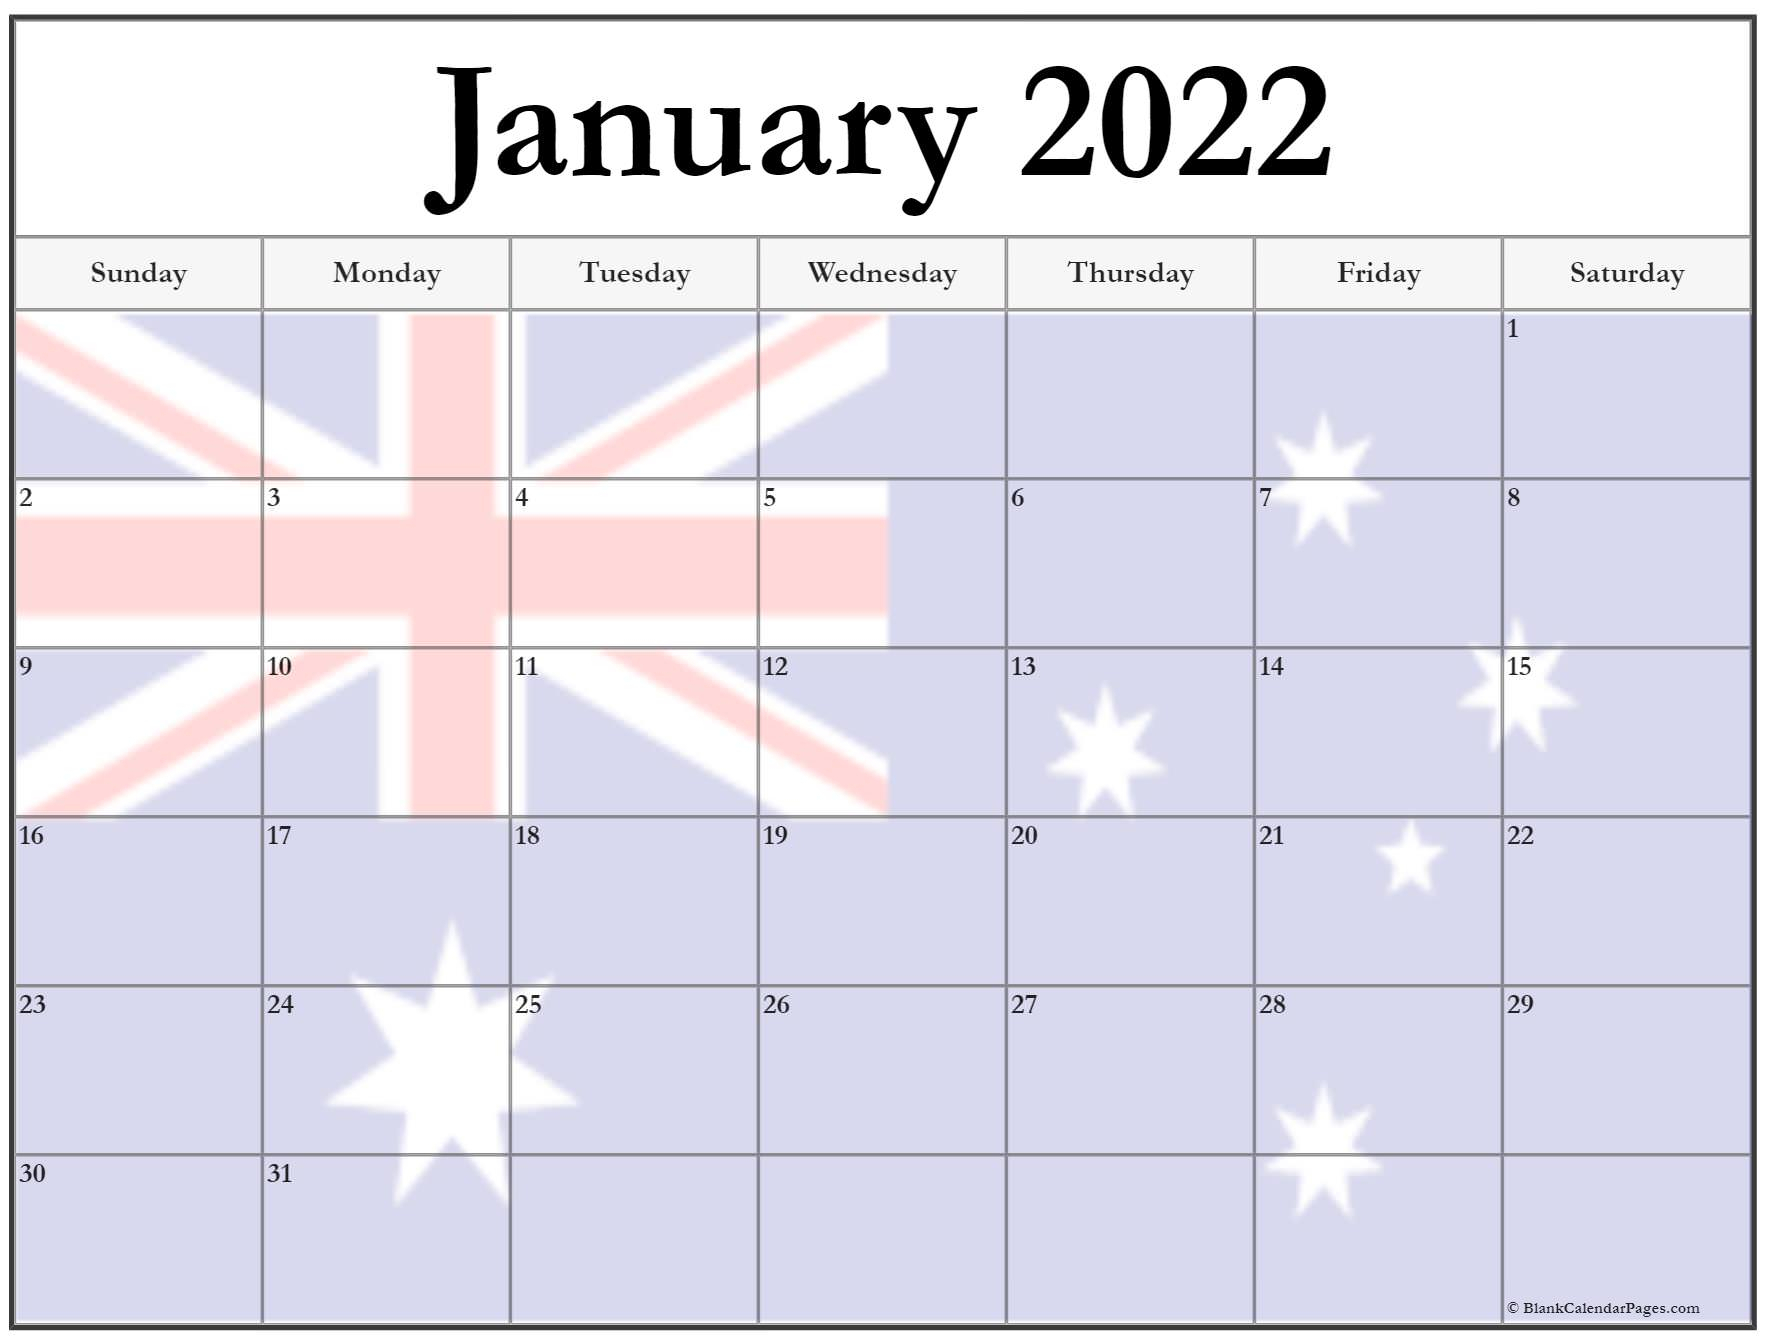 Collect Calendar For 2022 In January